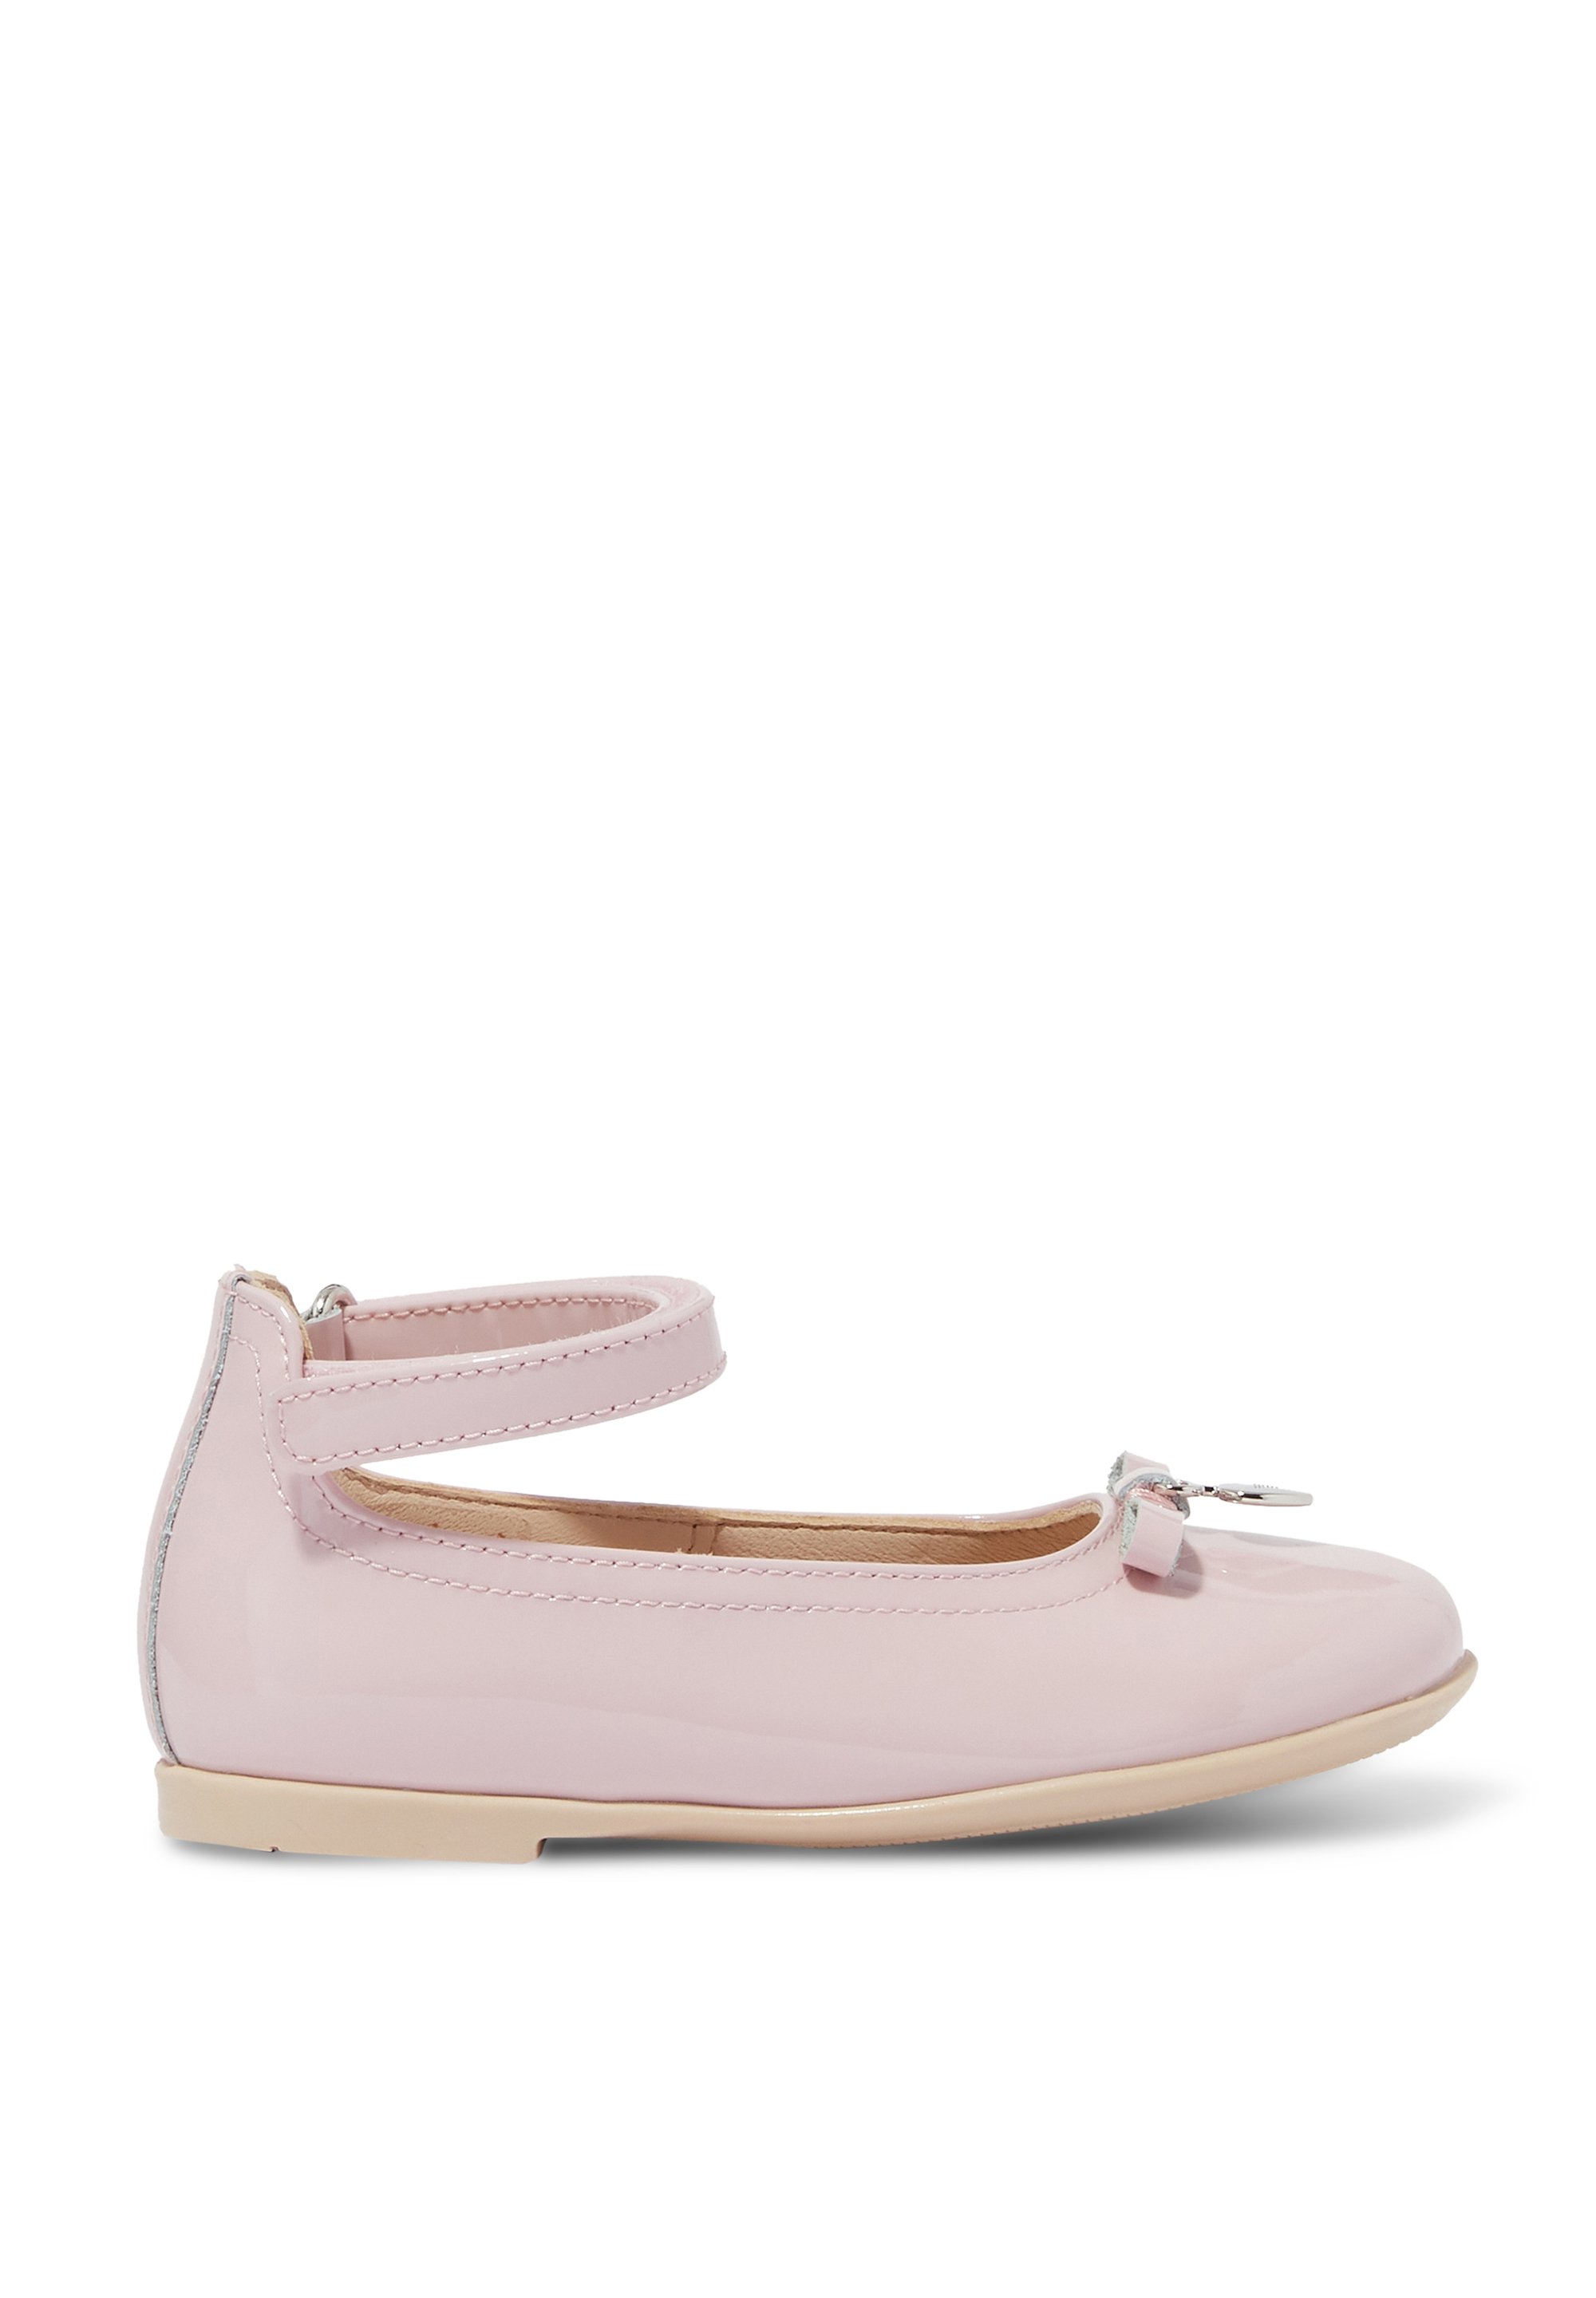 Shop Girls Clothing and Shoes Online | Bloomingdale's UAE